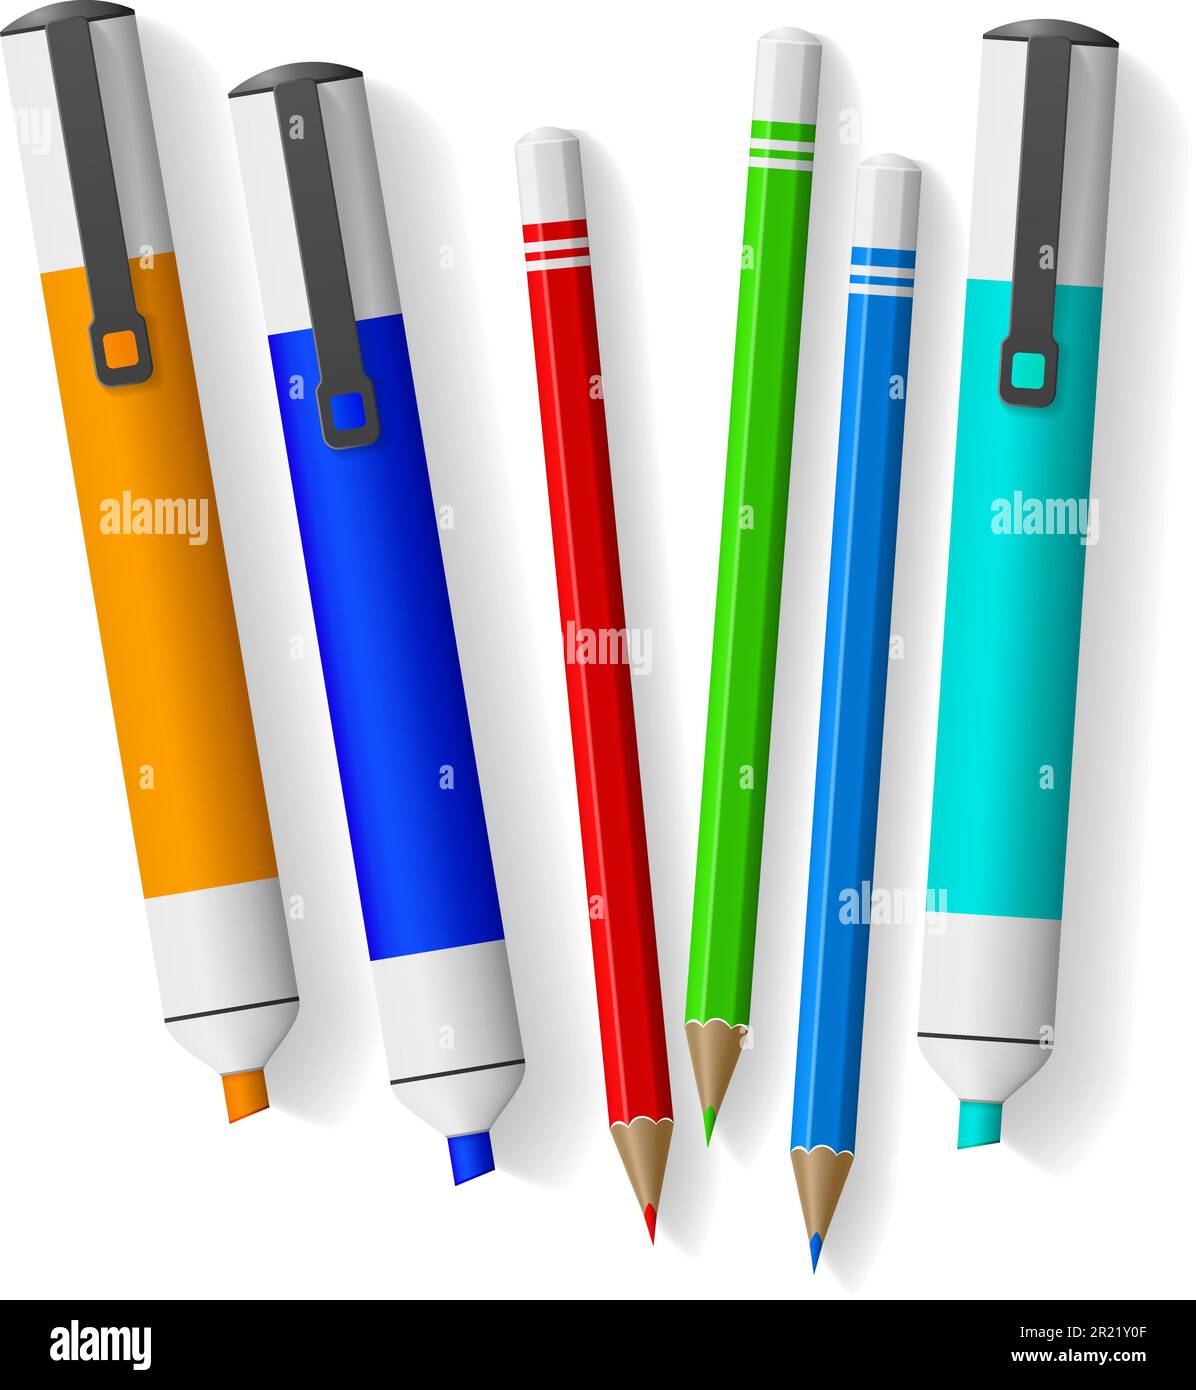 https://c8.alamy.com/comp/2R21Y0F/realistic-school-supply-office-stationery-color-highlighters-sharpened-pencils-children-painter-education-graphite-pens-and-pigment-markers-for-2R21Y0F.jpg